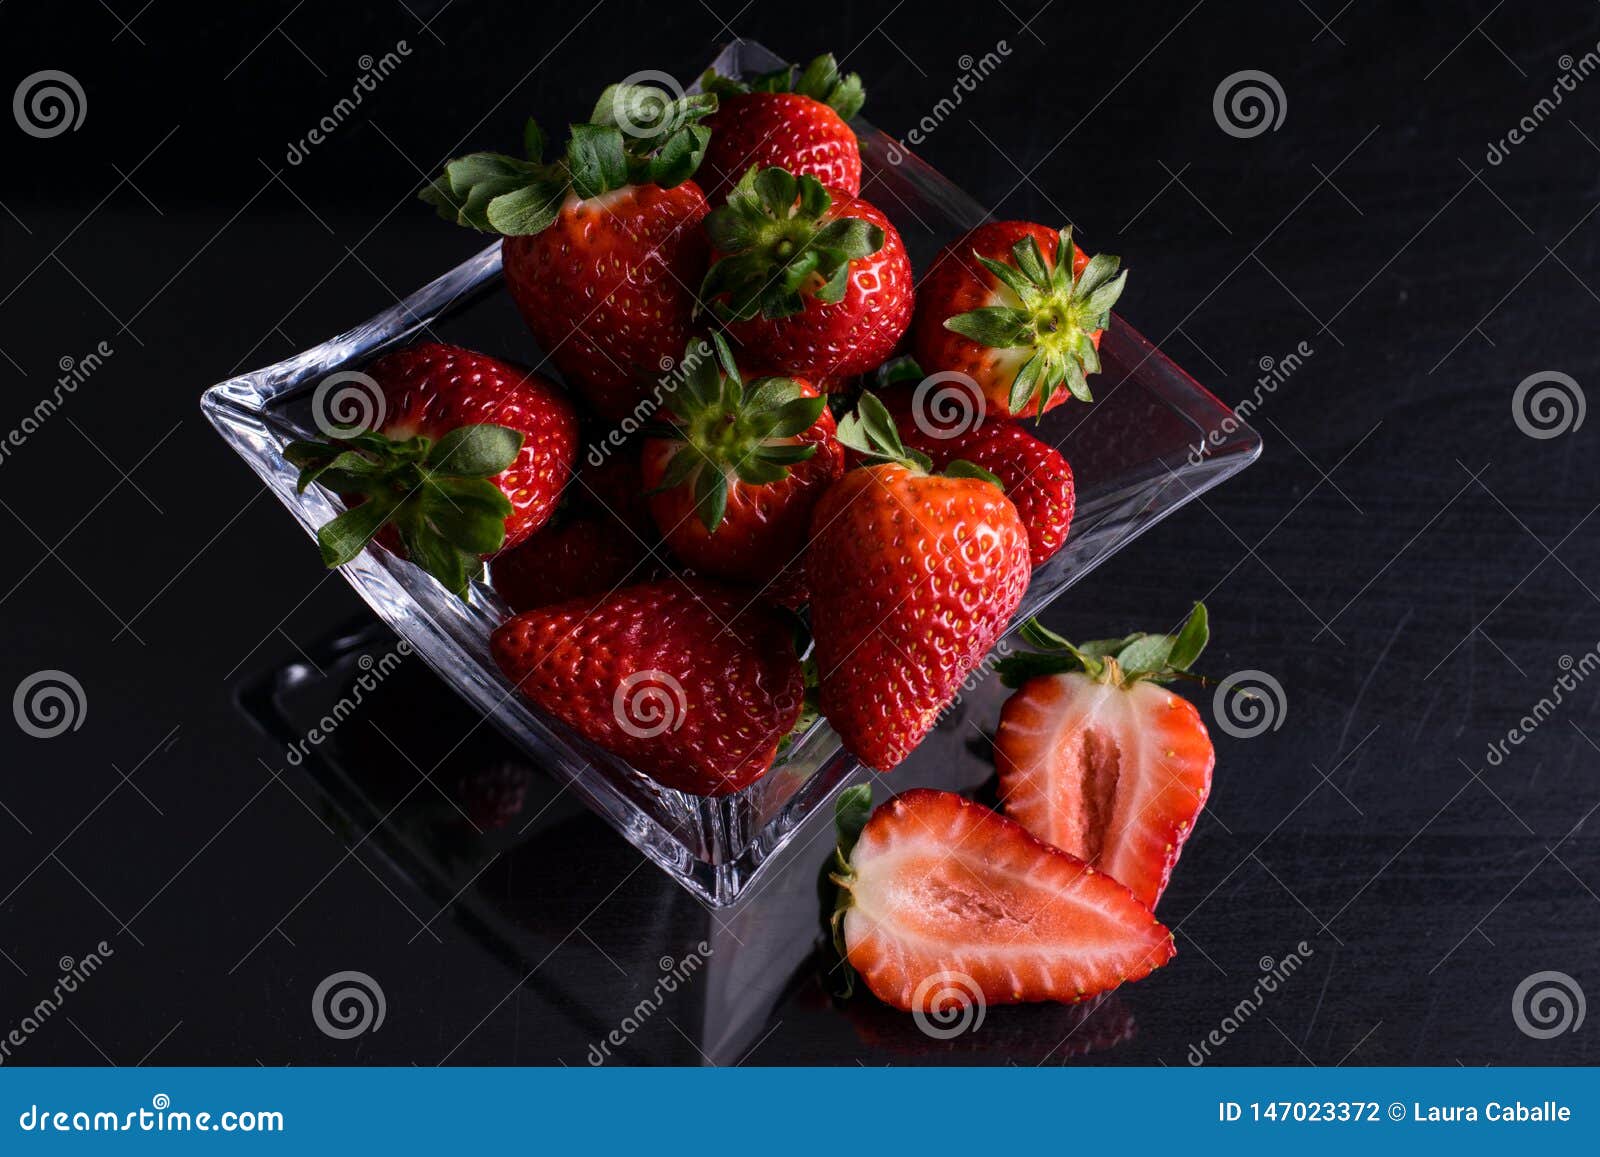 bowl of glass with strawberries